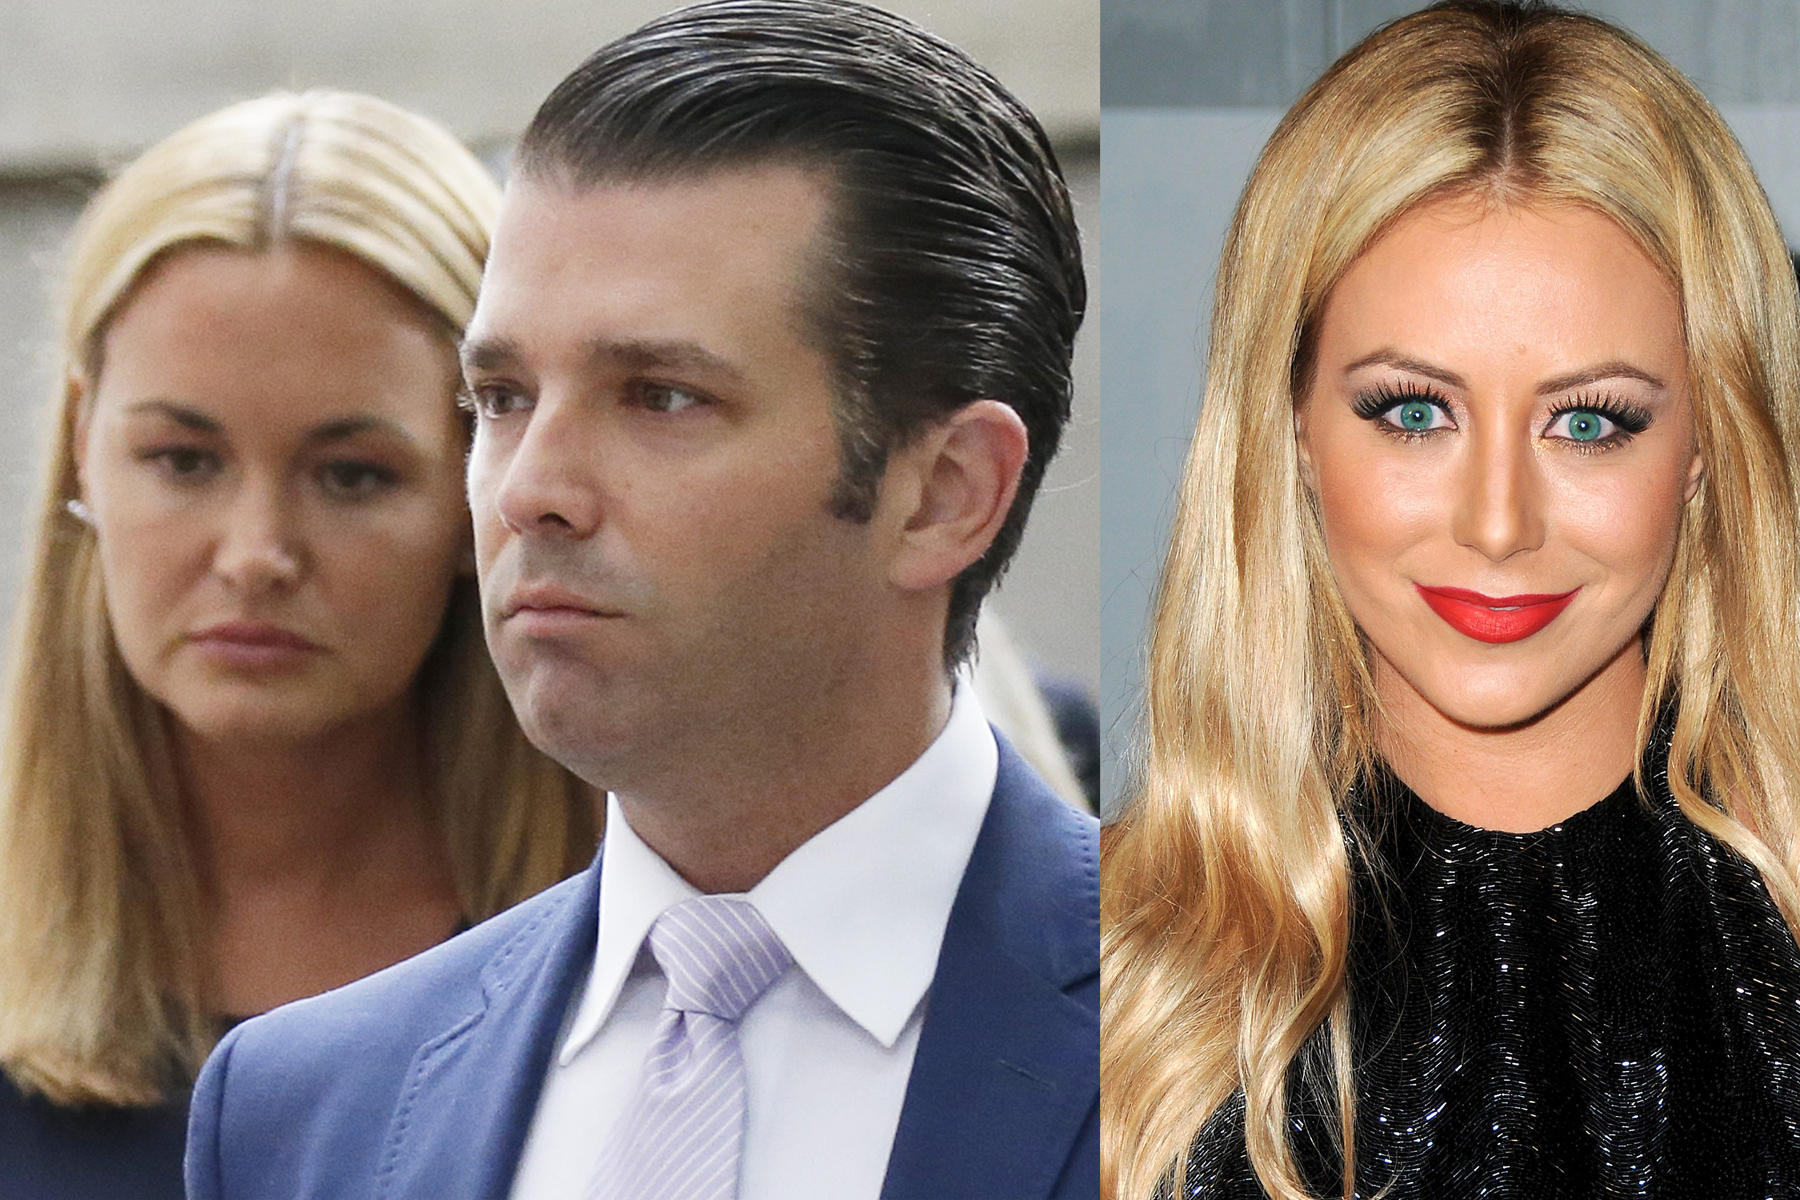 <p><span>Like his father, Donald Trump Jr. has been at the center of a cheating scandal. In 2018 -- days after his wife of 12 years, Vanessa, </span><a href="https://www.wonderwall.com/celebrity/couples/celebrity-splits-breakups-divorces-2018-3013134.gallery?photoId=192382">filed for divorce</a><span> -- multiple outlets reported that Don Jr. had an </span><a href="https://www.wonderwall.com/news/did-aubrey-oday-have-affair-donald-trump-jr-3013293.article">affair</a><span> with former Danity Kane singer Aubrey O'Day in late 2011 and early 2012 after they got close while filming "The Celebrity Apprentice." People magazine reported that the alleged affair ended after Vanessa, who was reportedly pregnant with one of their five children around the time, discovered sexy text messages from Aubrey on her husband's phone. "I think his marriage to Vanessa was over long before Aubrey came along," a source told Page Six, adding that Don Jr.'s family "pressured" him into staying in the marriage. In fact, one source said the future President Donald Trump told his son to "knock it off." Aubrey went on to record two songs believed to be about the alleged affair, one titled "DJT." (Don Jr.'s middle name is John.)</span></p><p>Aubrey -- who in 2019 called Don Jr. her "ex" and onetime "soulmate" -- later went public with more details about their alleged affair including this unexpected reveal: On a July 2023 episode of Michael Cohen's "Mea Culpa" podcast, Aubrey said -- as reported by <a href="https://pagesix.com/2023/07/05/aubrey-oday-i-had-sex-with-donald-trump-jr-in-a-gay-club-bathroom/">Page Six</a> -- that her physical affair with Don Jr. began "in a gay club bathroom." </p><p>"I was hosting a gay club and our first time going out together — he wanted to see me so bad — and I told him, 'Well, I'm gonna be at a gay club tonight'," she claimed. "So Don shows up to the gay club — and I'm talking about this is one of the biggest gay parties in New York ... Everybody was in a G-string or less." She added that the reality TV star and businessman was surprisingly at ease there, which isn't what many might expect considering his anti-LGBTQIA+ views that emerged after his father pursued politics. "I looked at his Instagram for the first time in years and saw all kinds of jokes of belittling the gay community … and I thought to myself, 'Man, you were super comfortable in that gay club.' In fact, so comfortable that we ended up going to the bathroom and, for the first time, had sex in a gay club bathroom," Aubrey said.</p><p><span>MORE: </span><a href="https://www.msn.com/en-us/community/channel/vid-kwt2e0544658wubk9hsb0rpvnfkttmu3tuj7uq3i4wuywgbakeva?item=flights%3Aprg-tipsubsc-v1a&ocid=social-peregrine&cvid=333aa5de5a654aa7a98a6930005e8f60&ei=2" rel="noreferrer noopener">Follow Wonderwall on MSN for more fun celebrity & entertainment photo galleries and content</a></p>